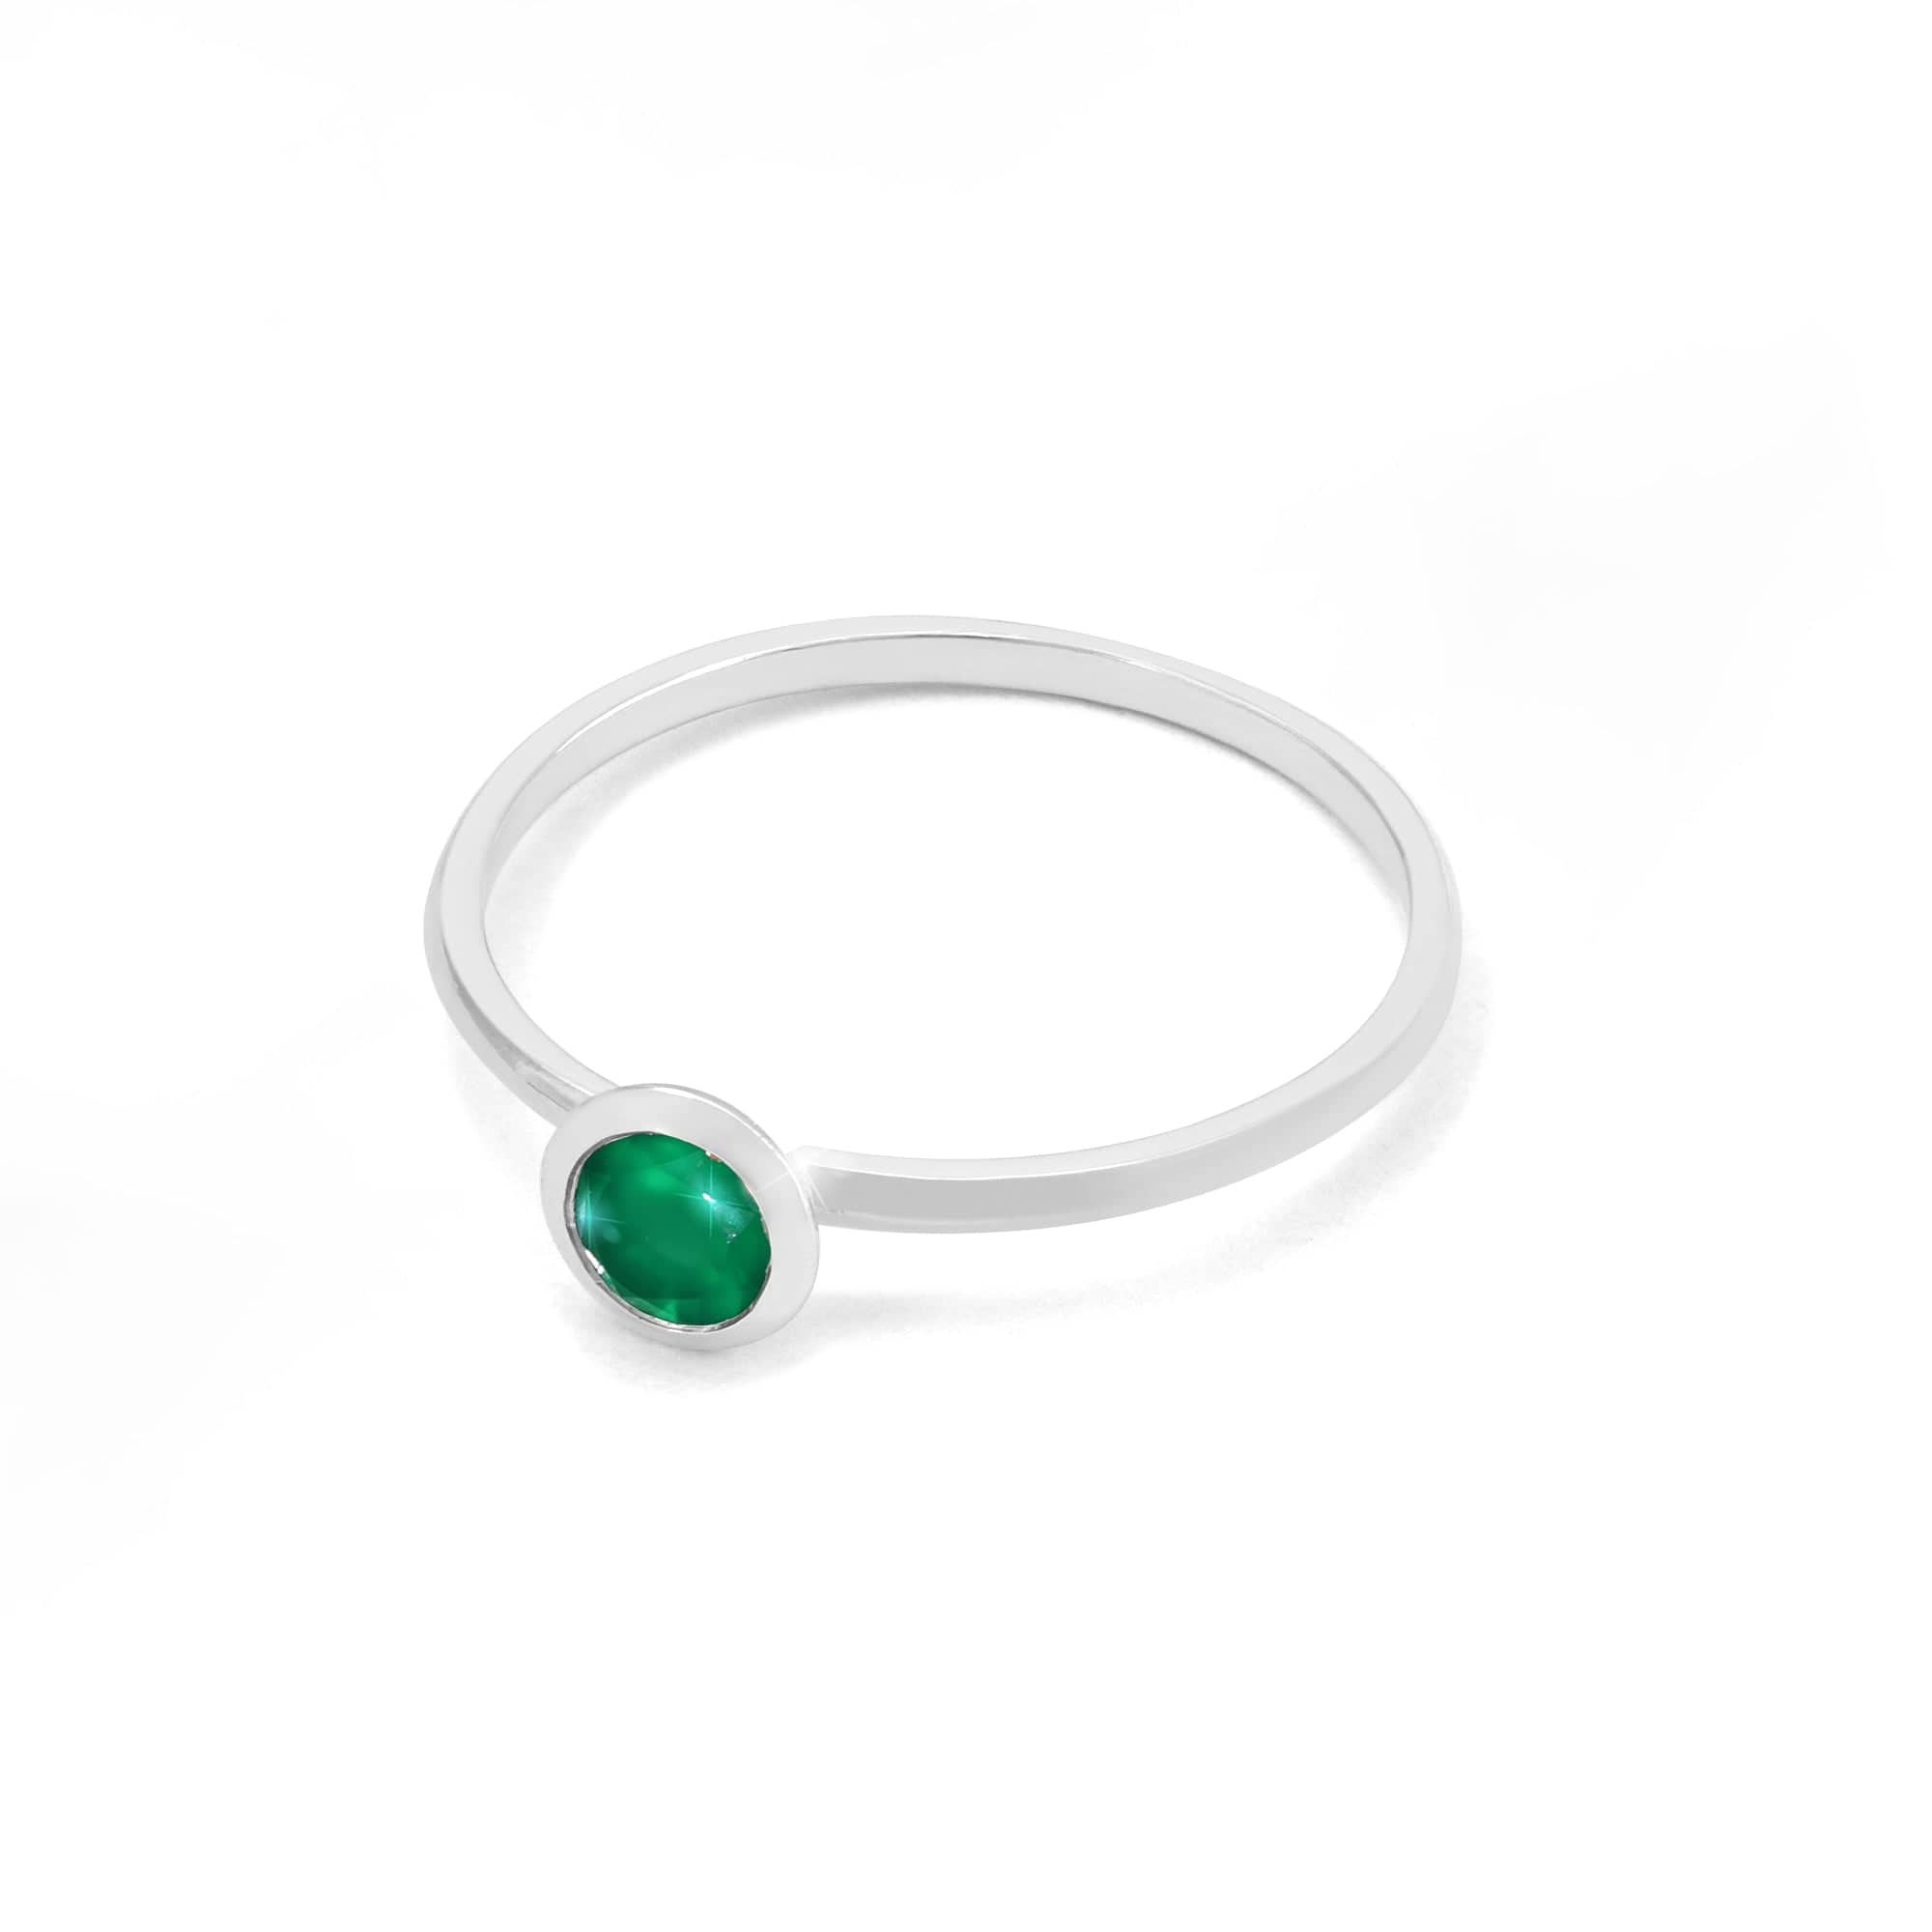 Boma Jewelry Rings Green Onyx / 5 Colored Gemstone Ring